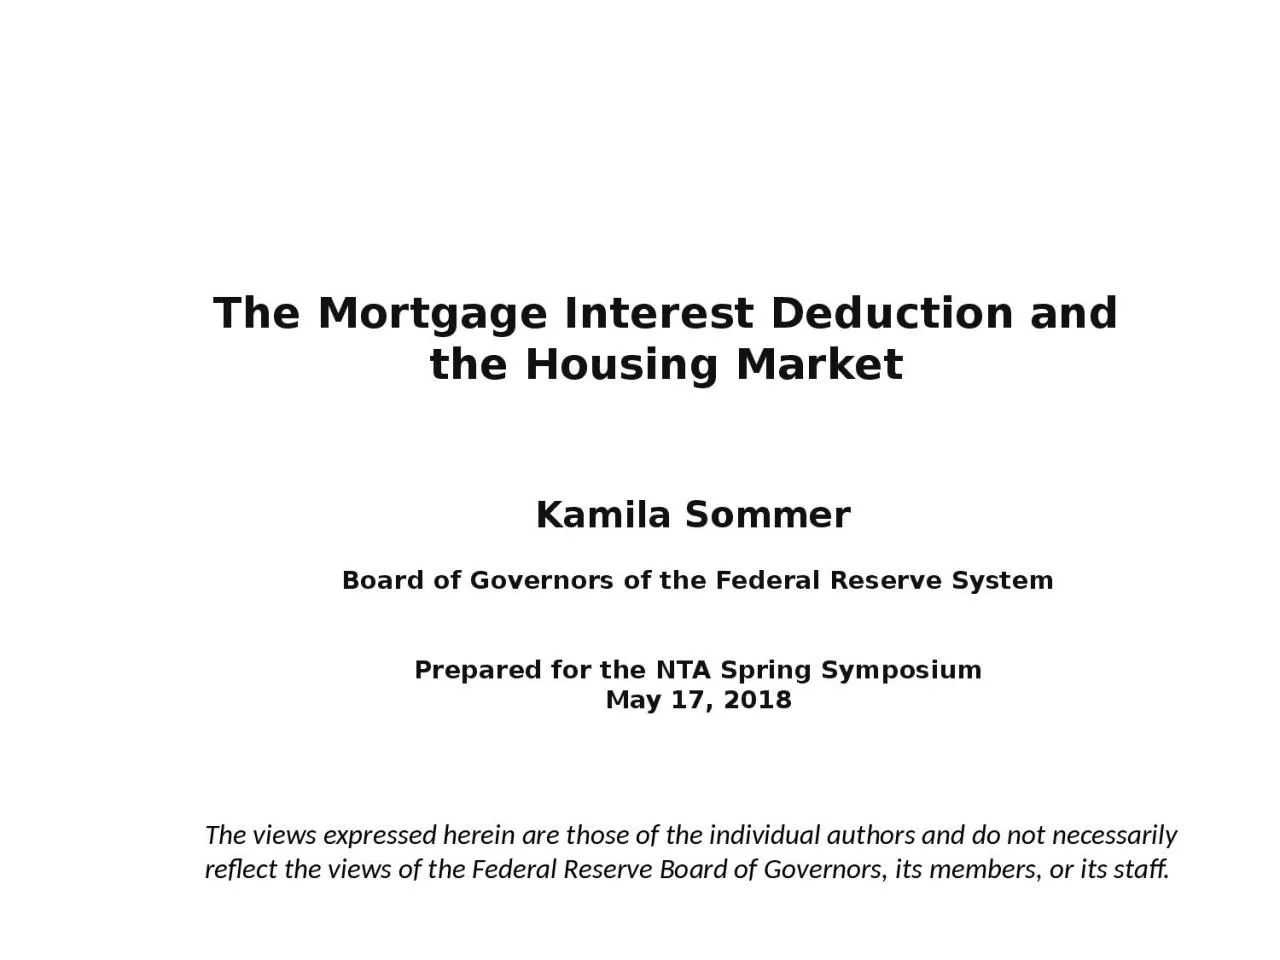 The Mortgage Interest Deduction and the Housing Market